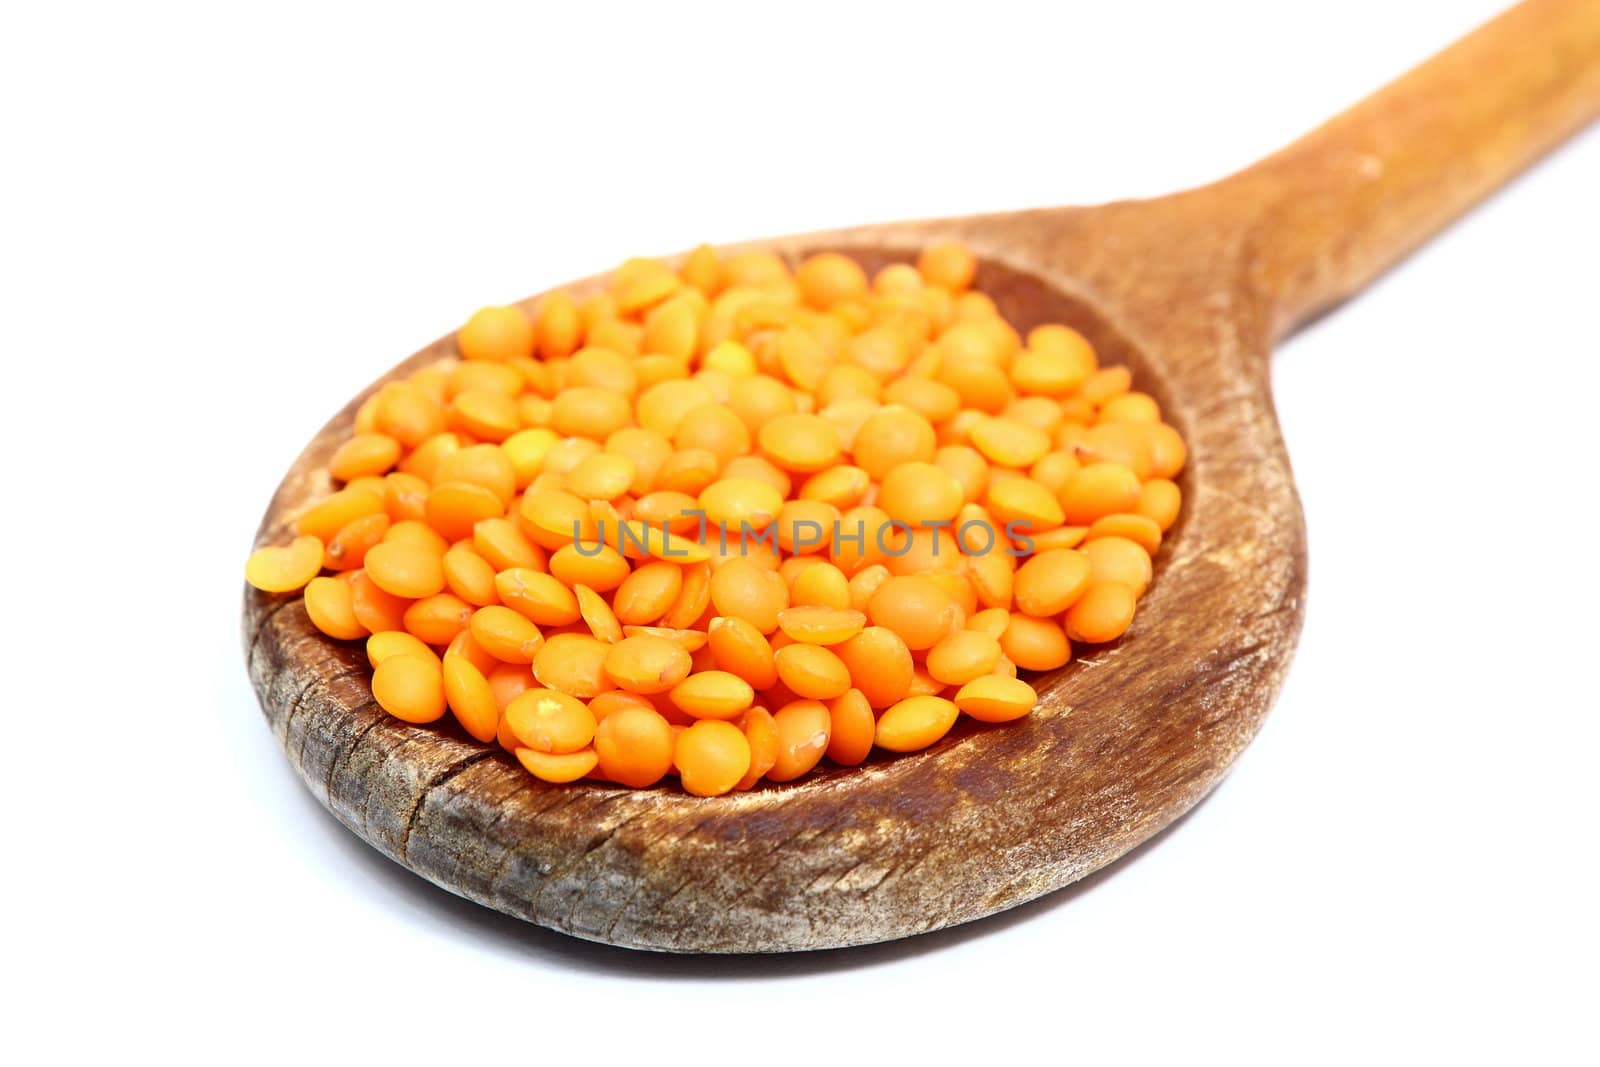 red lentil in wooden spoon by taviphoto